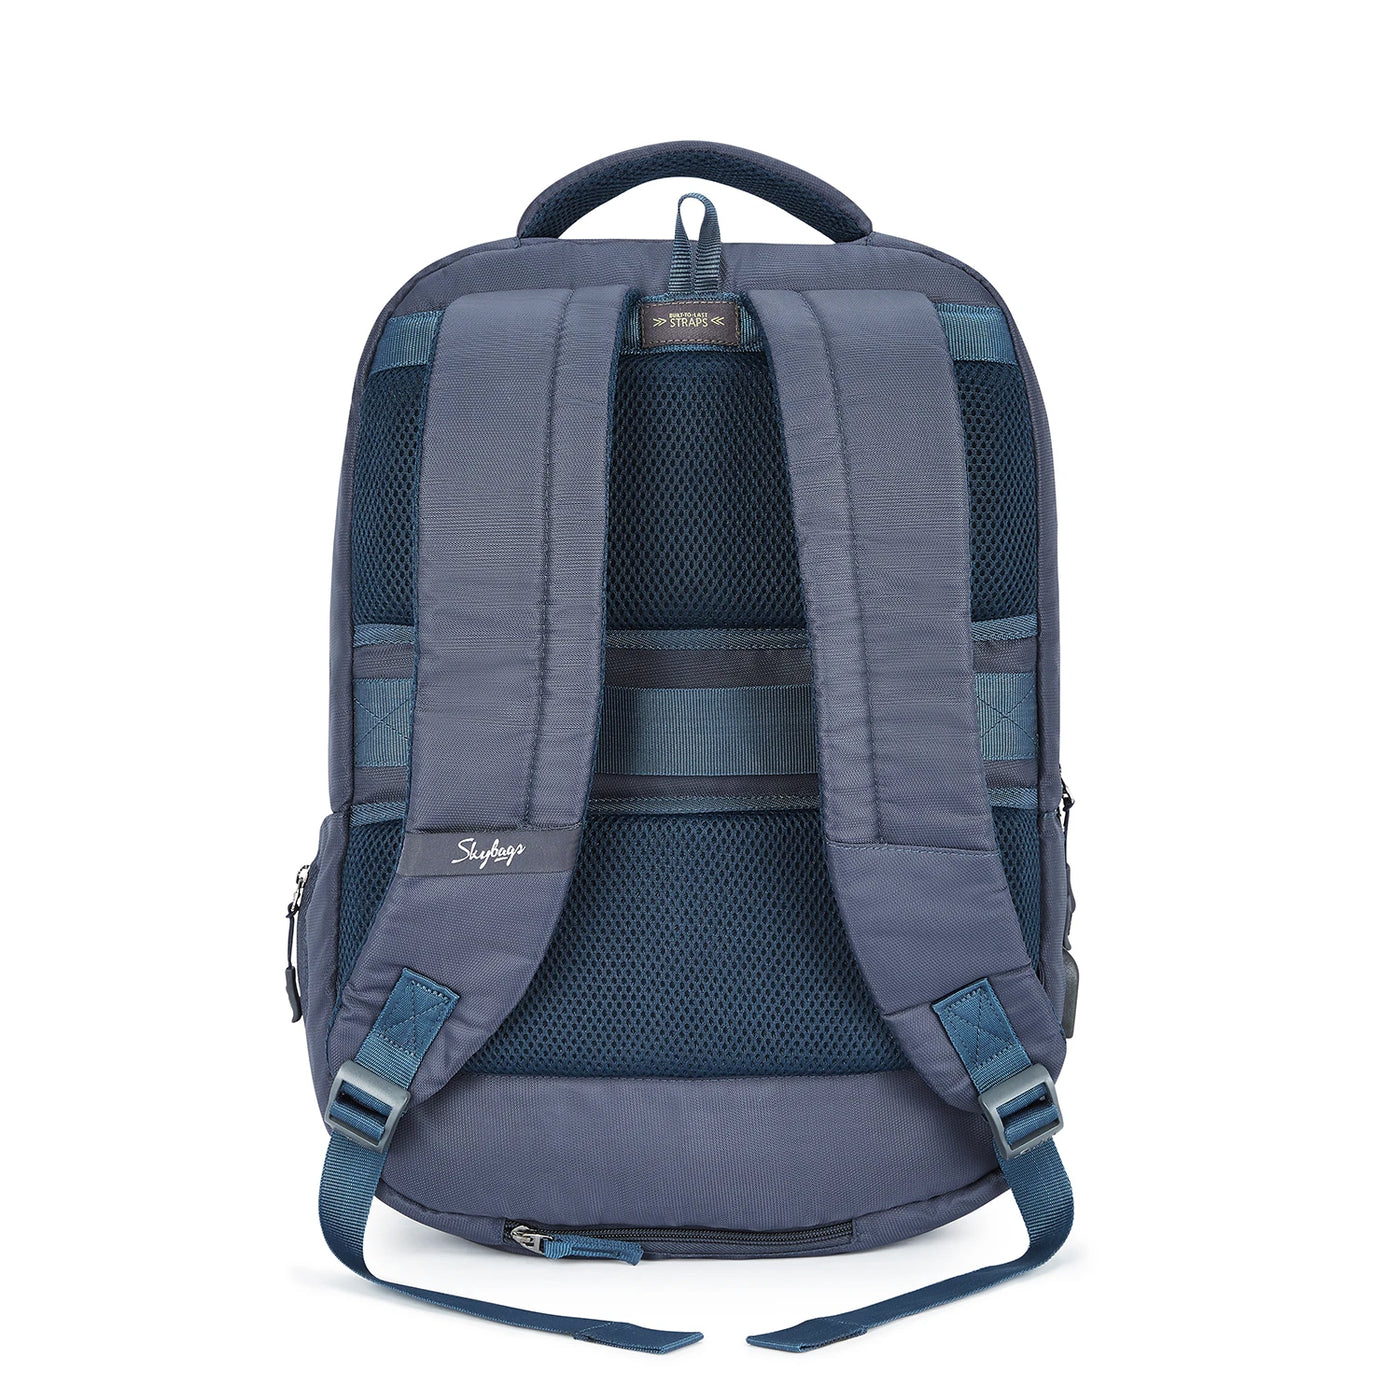 Skybags Valor "01  Laptop Backpack Navy"